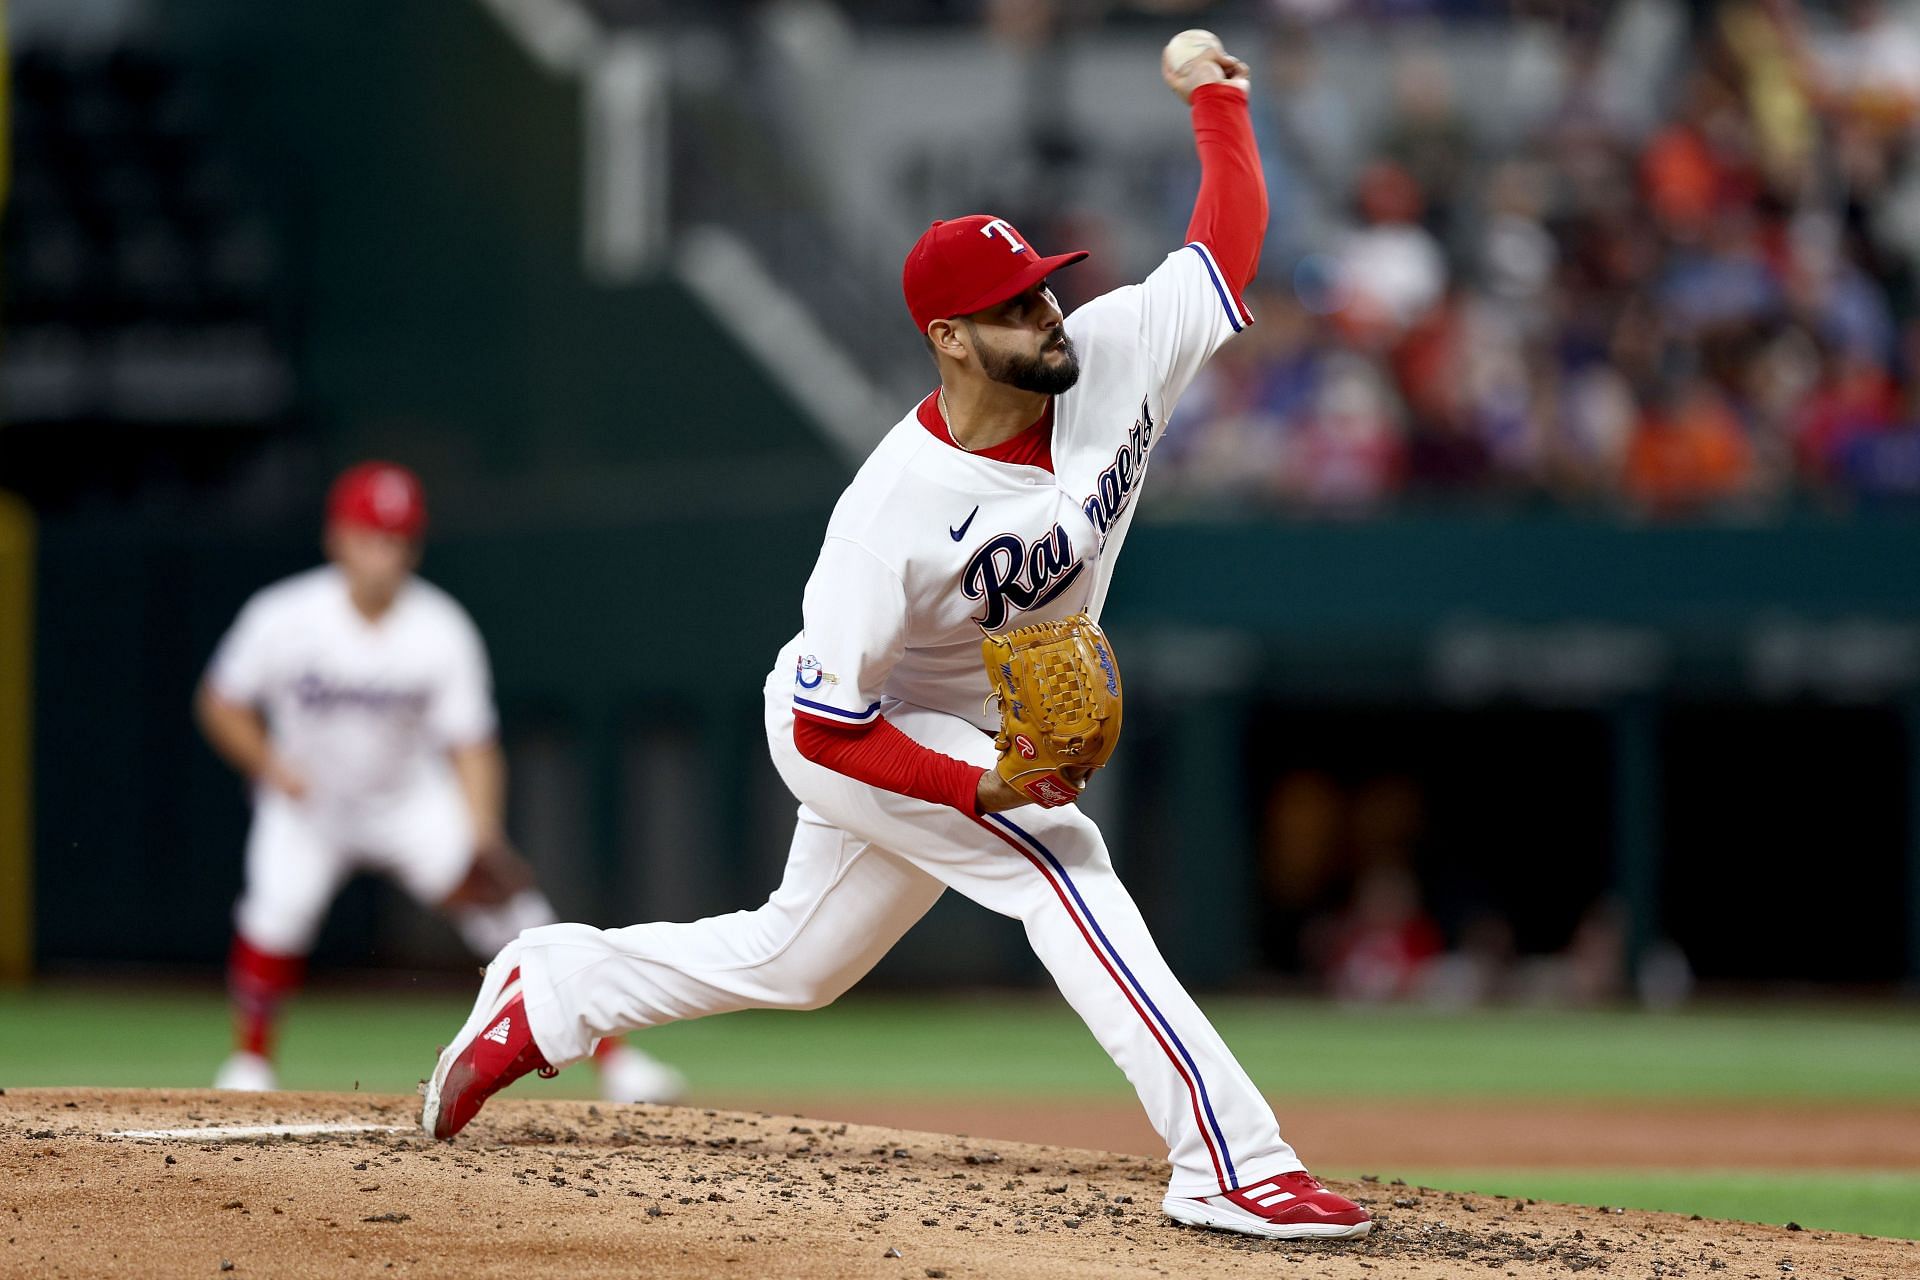 Martin Perez made his second Texas Rangers stint last season and became an All-Star.